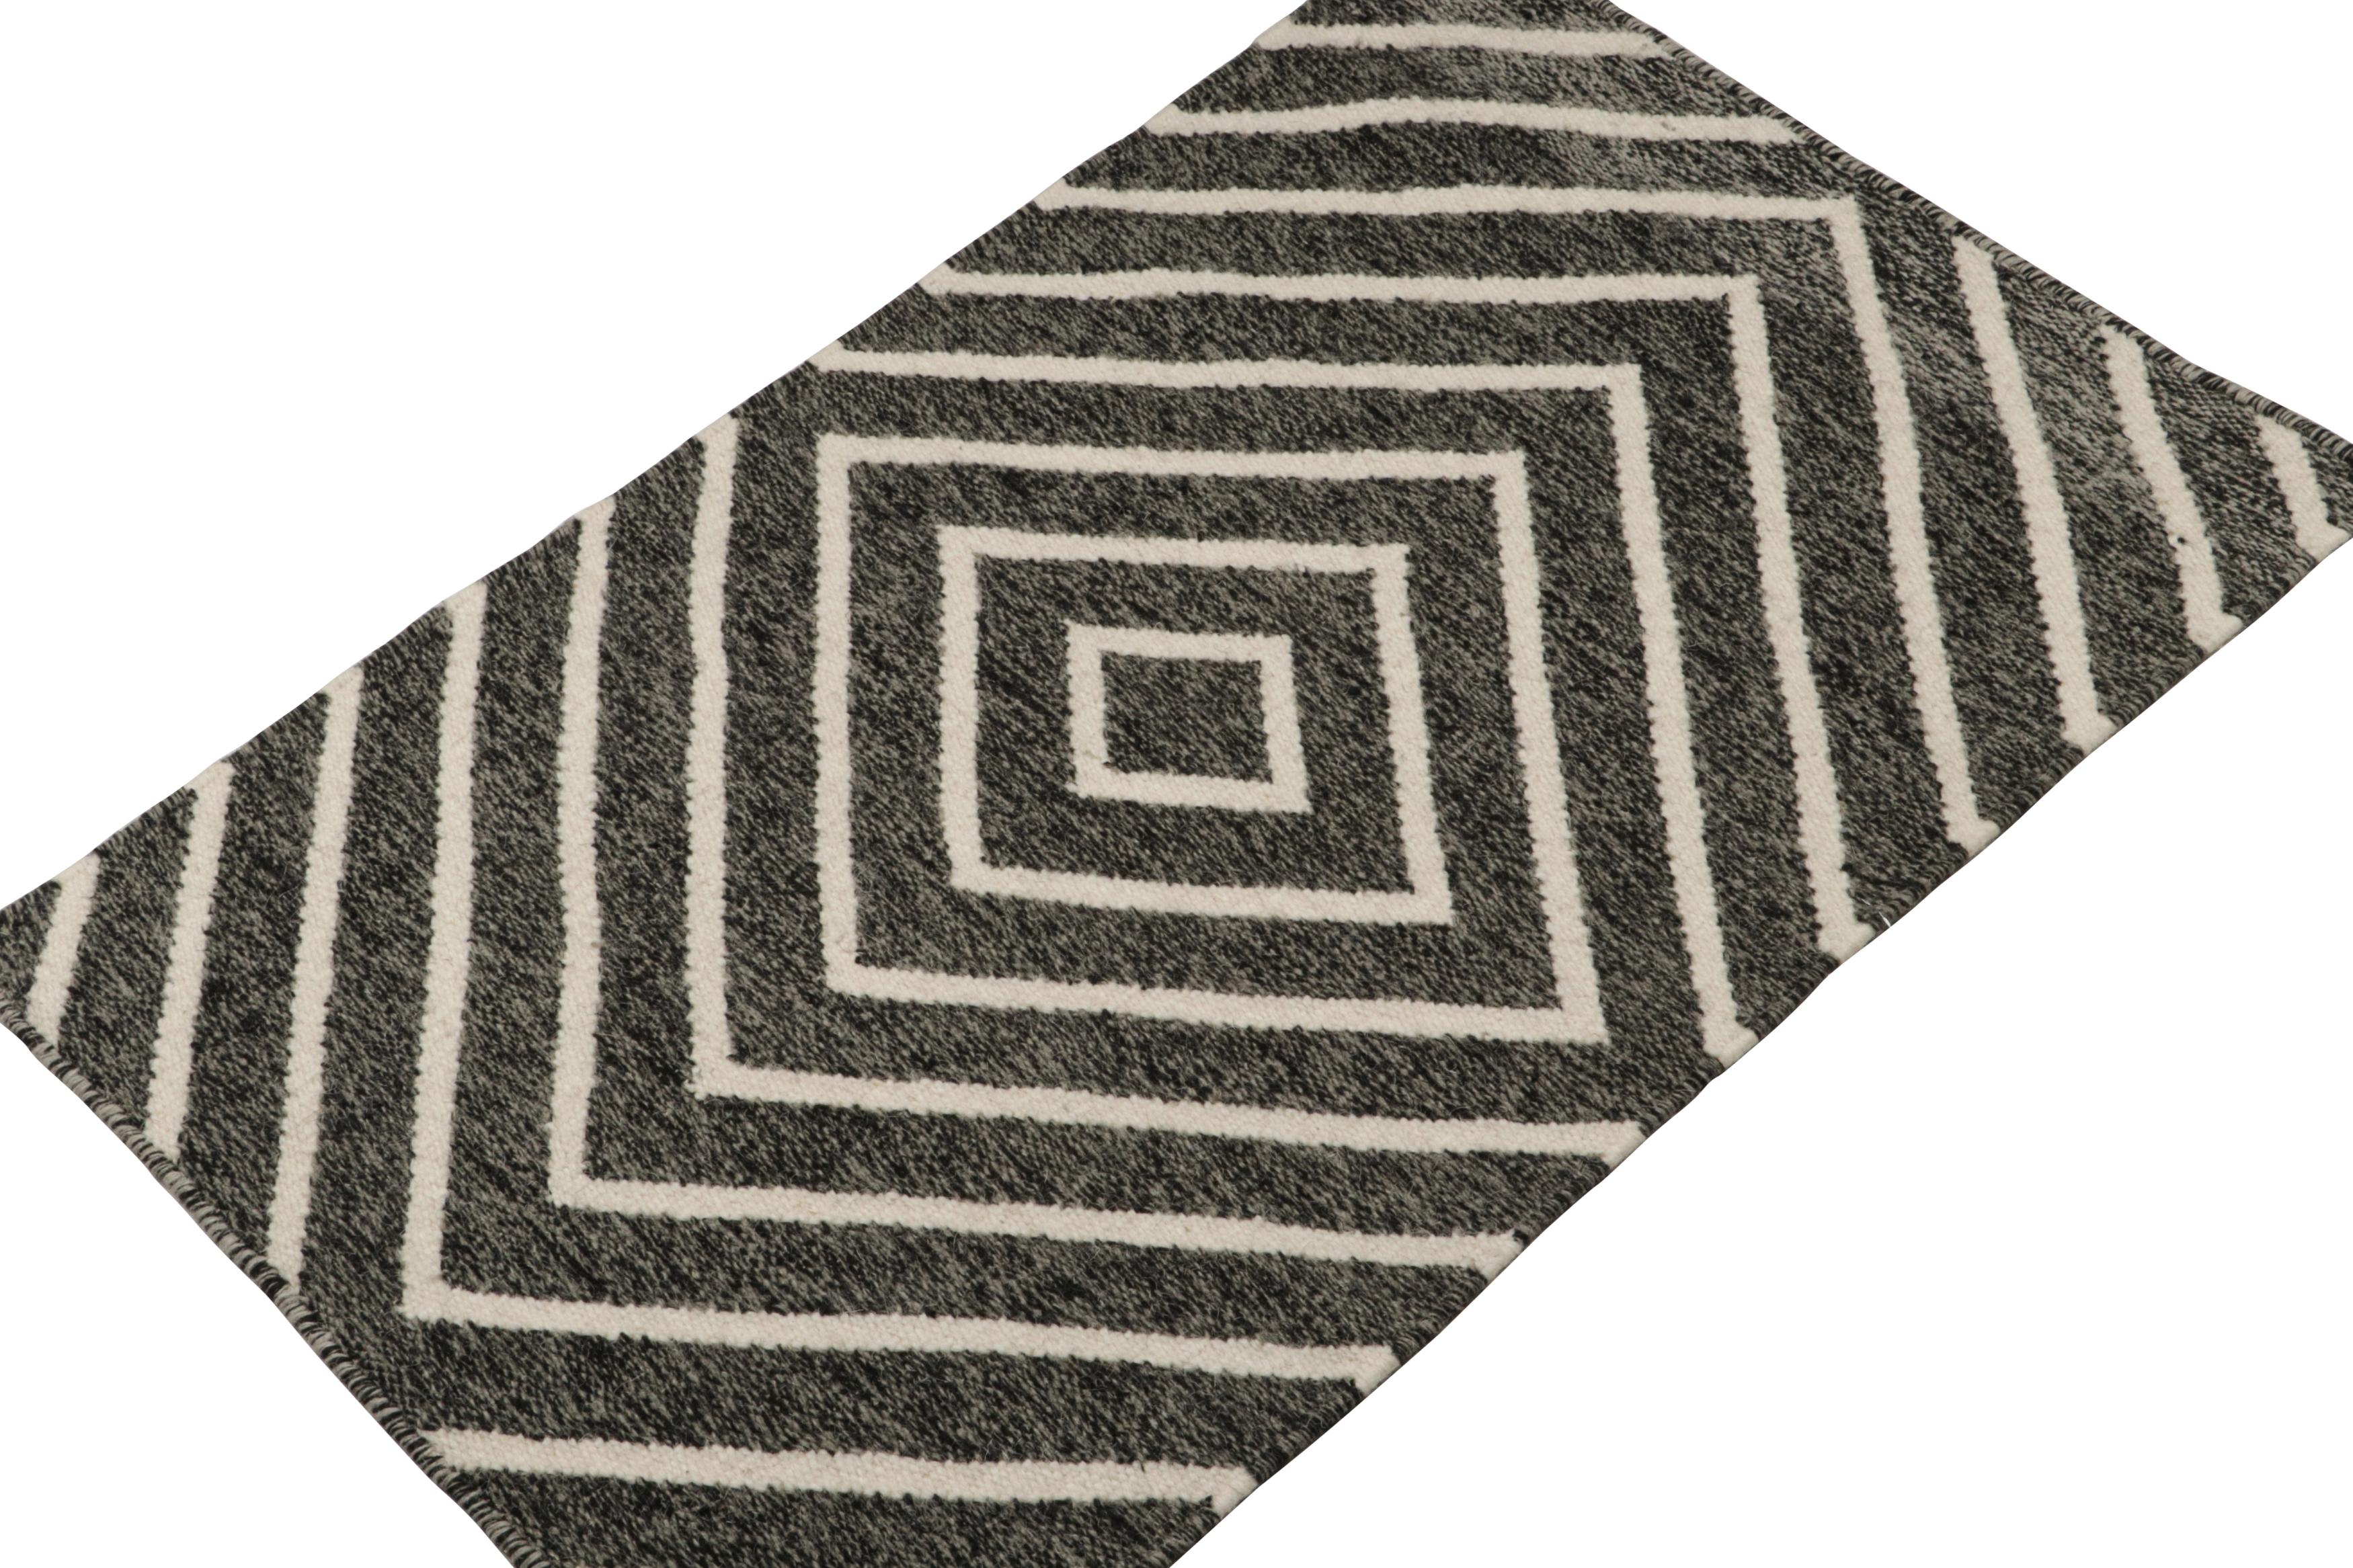 This 2x3 Kilim and accent rug is a new addition to the modern flatweave collection by Rug & Kilim. 
 
On the Design: 

Handwoven in wool, this contemporary enjoys white diamond patterns on charcoal gray and black with a salt-and-pepper striae. Its